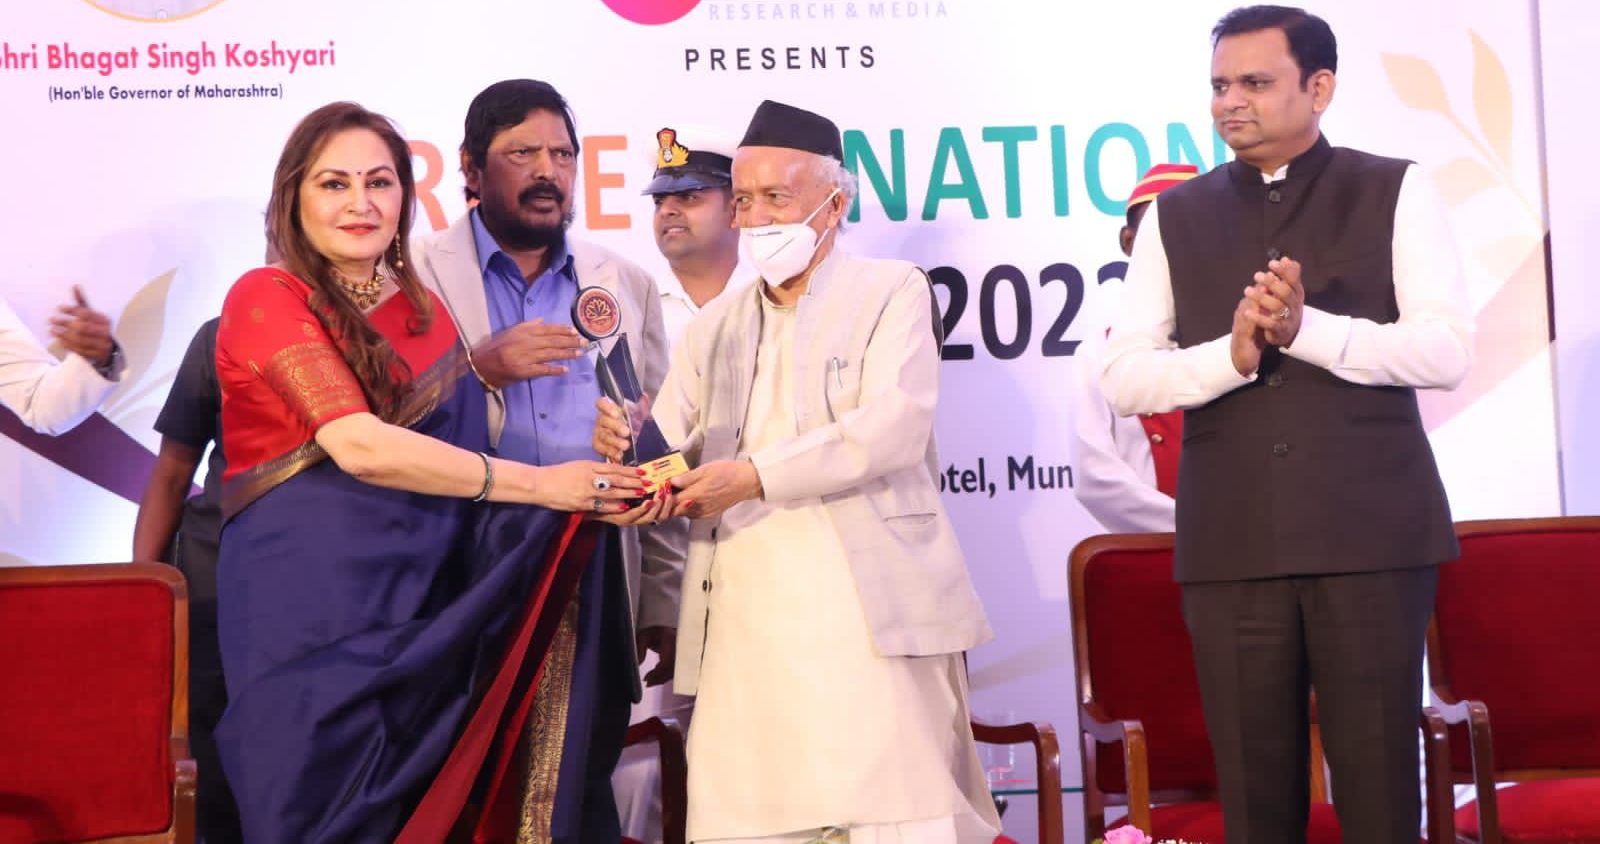 Pride of Nation Awards,2022 felicitated achievers from various fields!